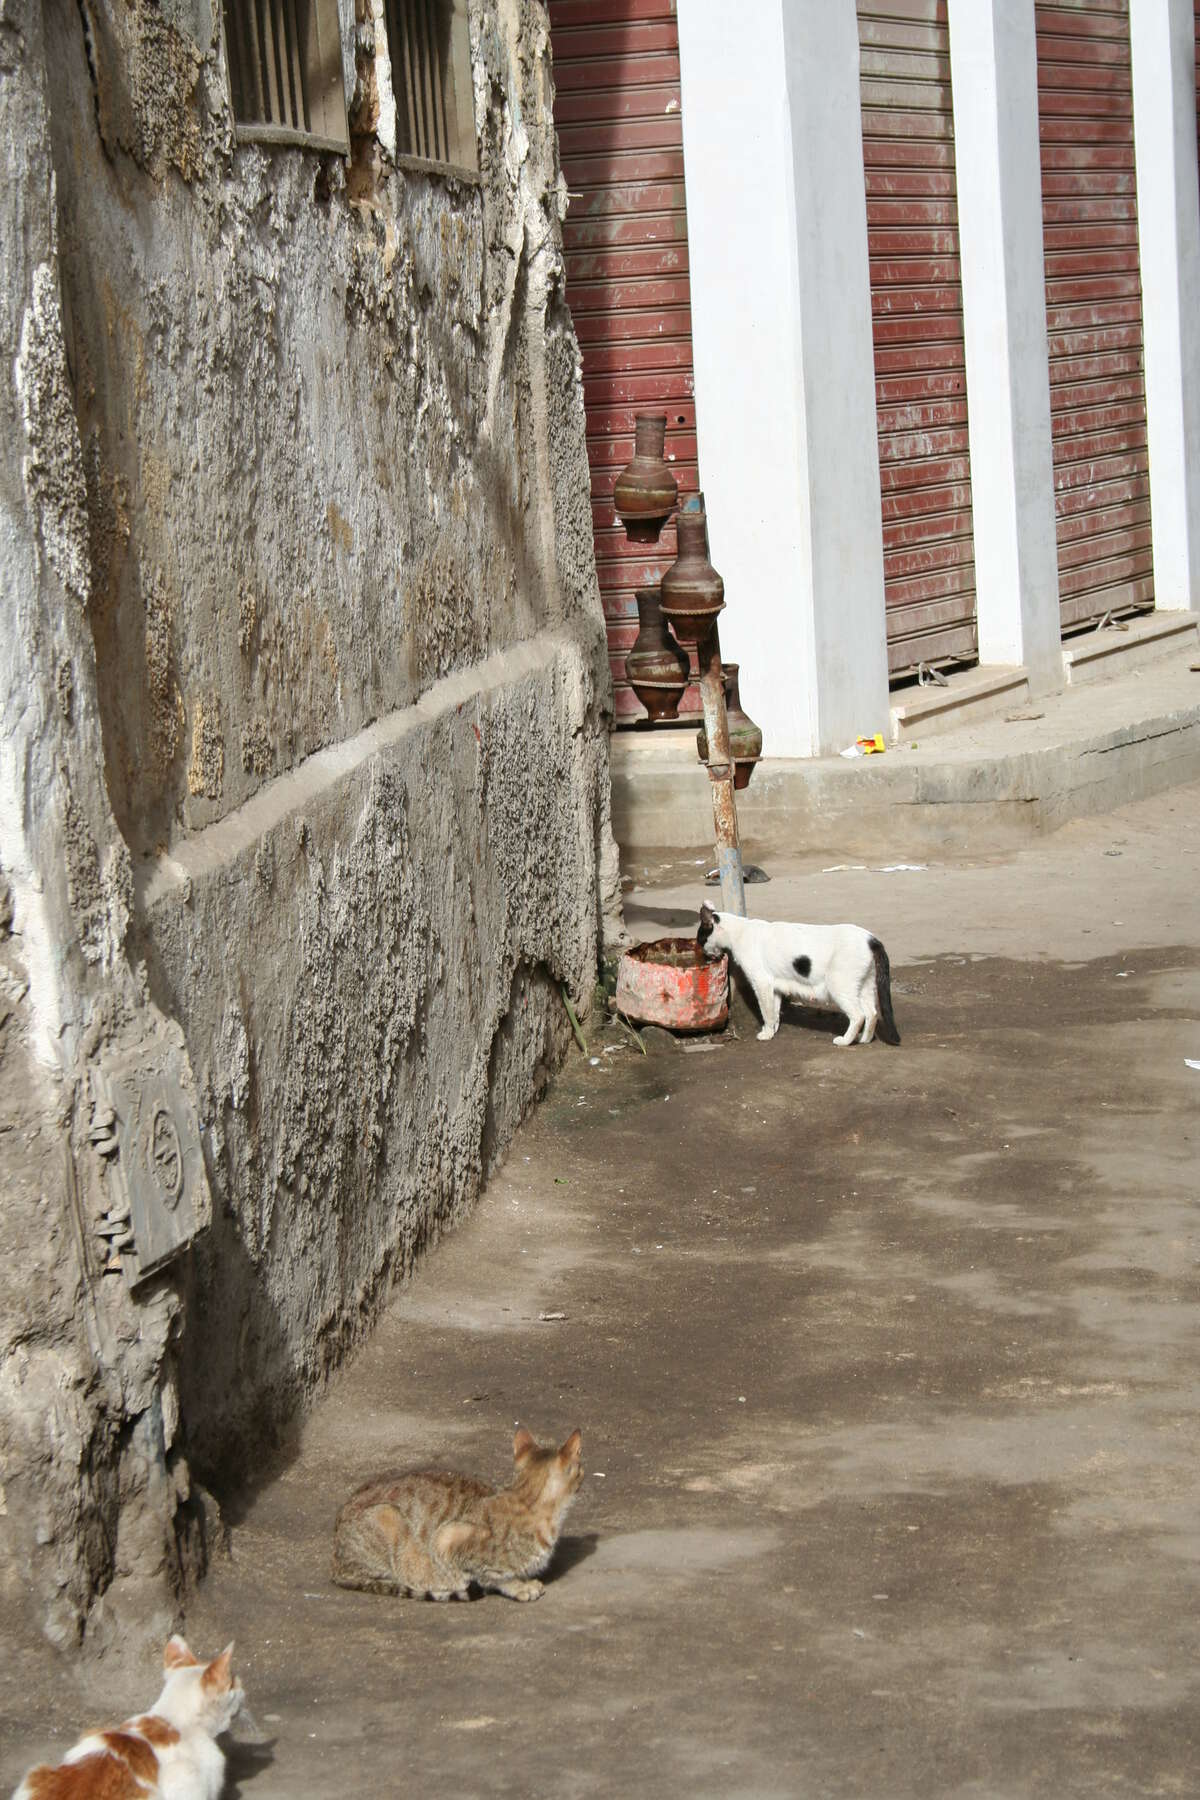 Side of sabil with four drinking water pots held up on a stand. There are three cats, one drinks from a water bowl on the ground.